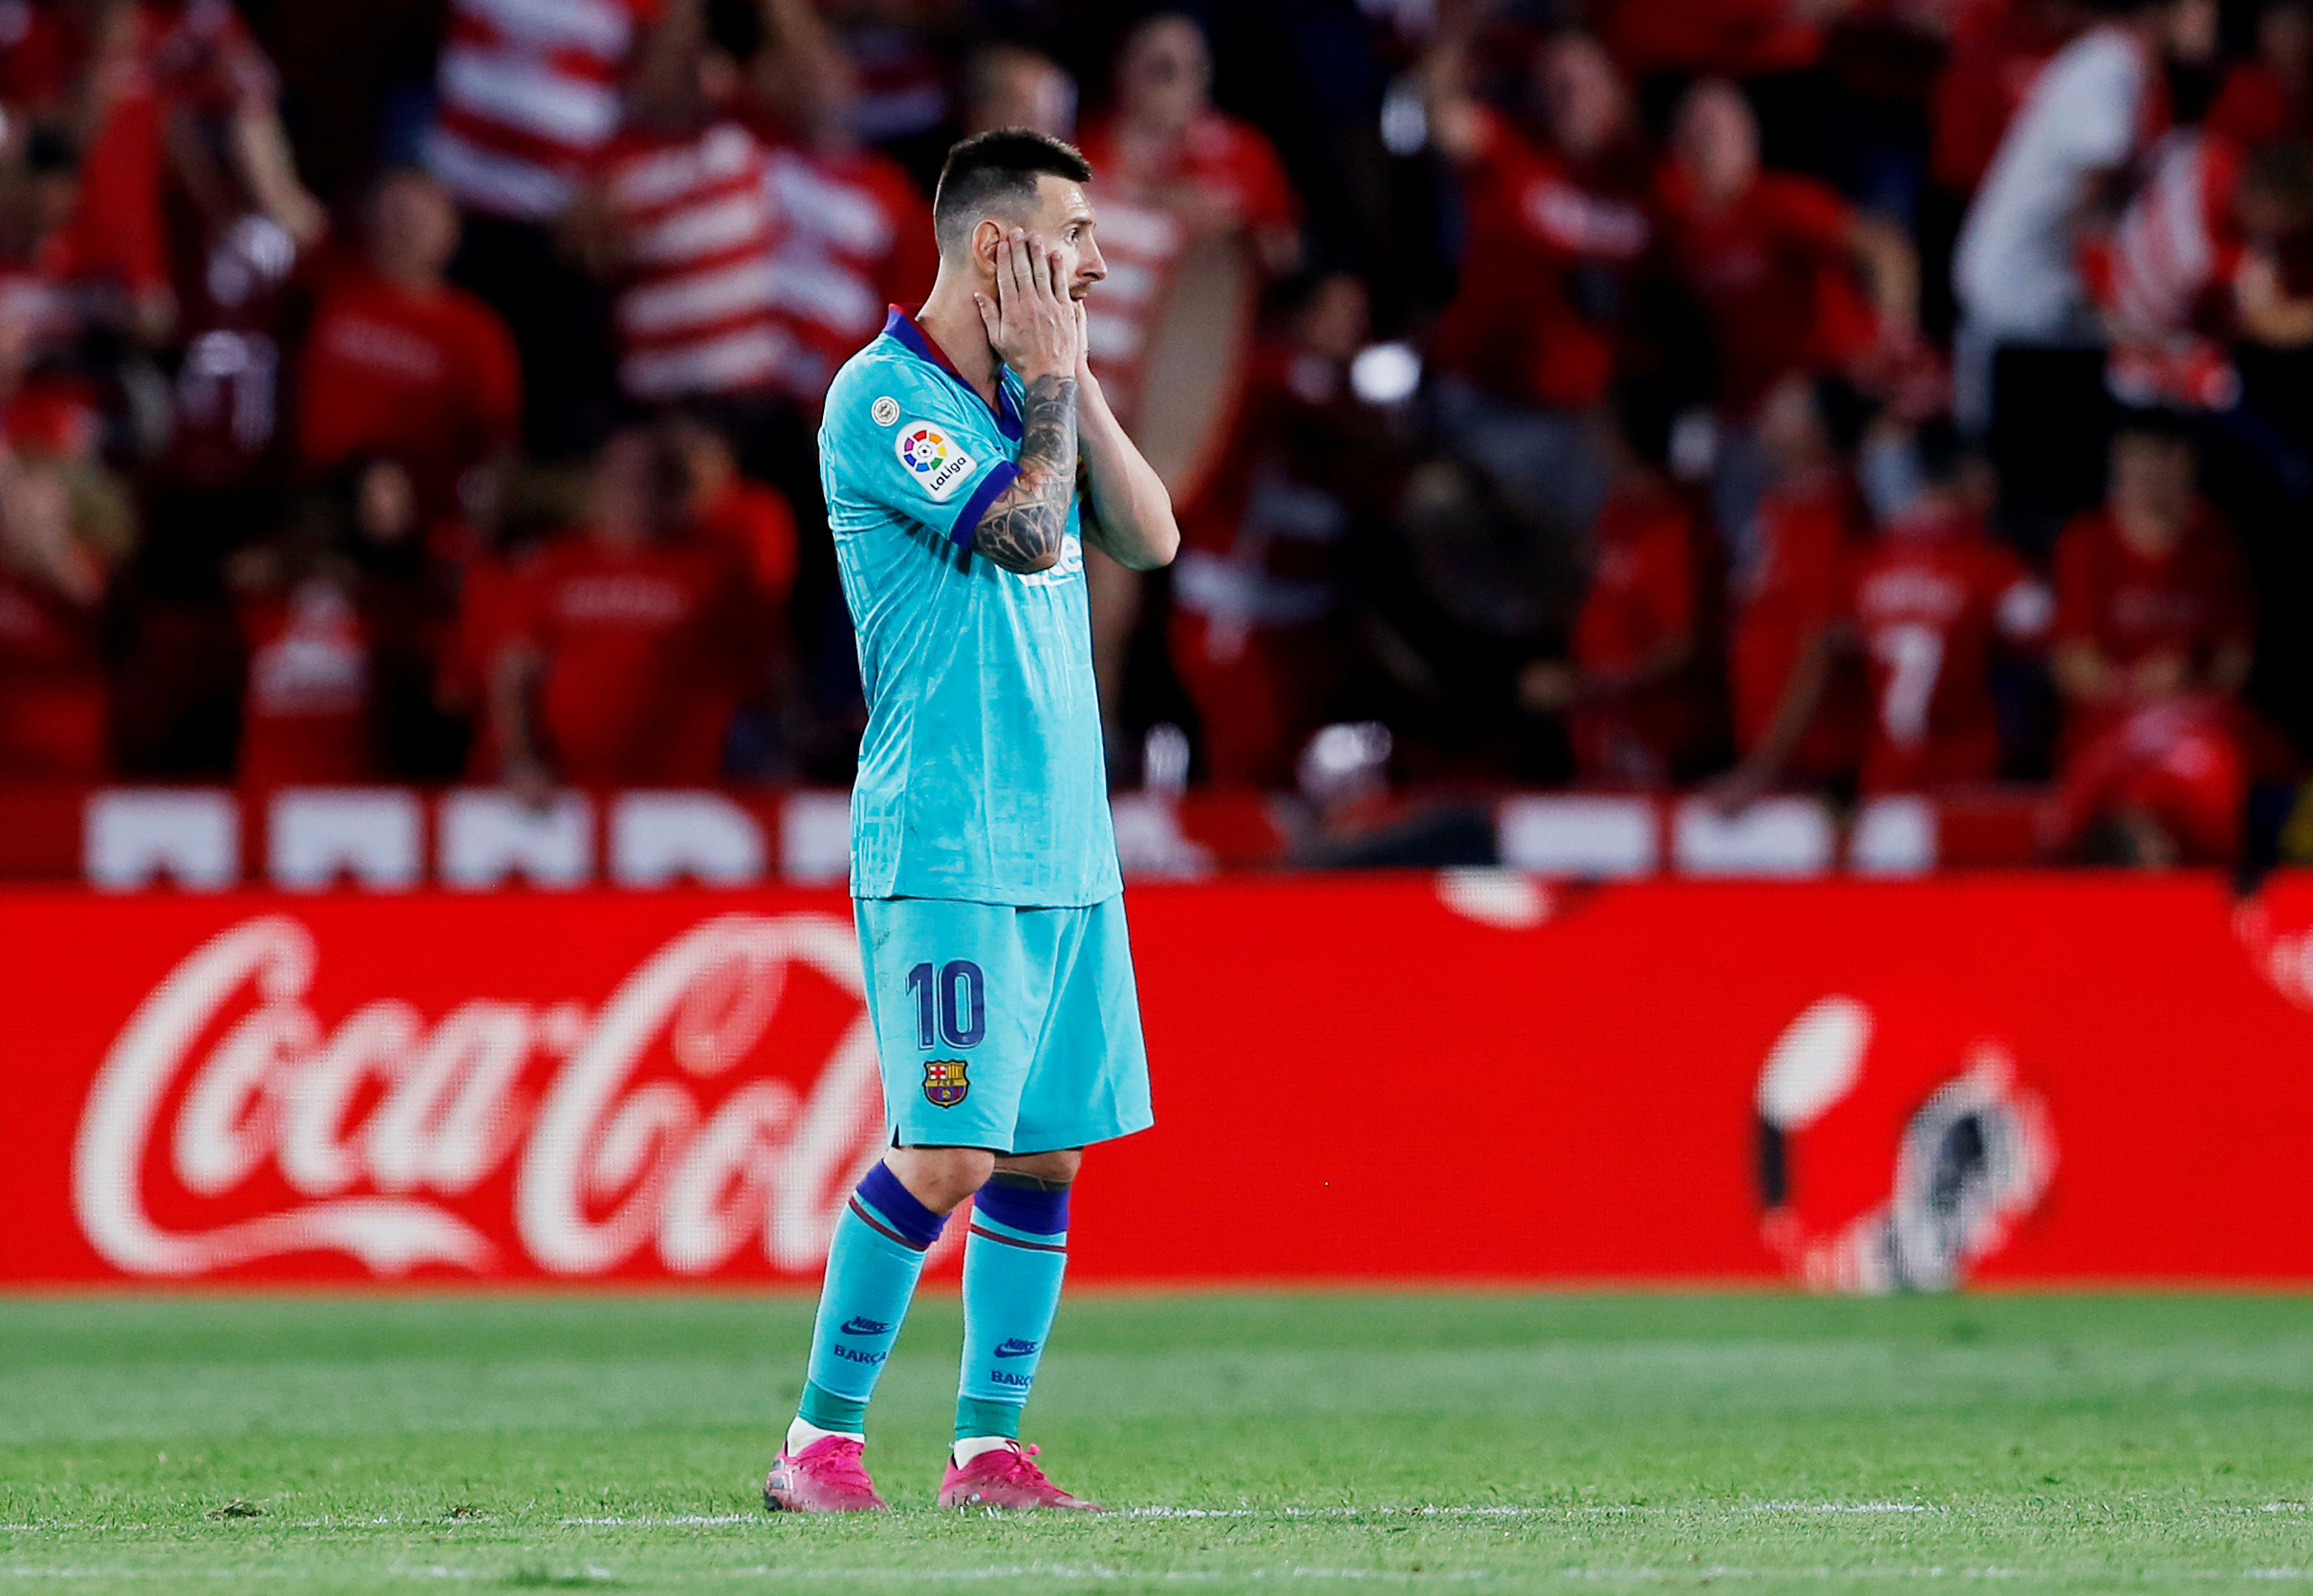 Leo Messi puts his face in his hands as Barcelona fall to a 0-2 defeat away to Granada (by Reuters/Marcelo Del Pozo)